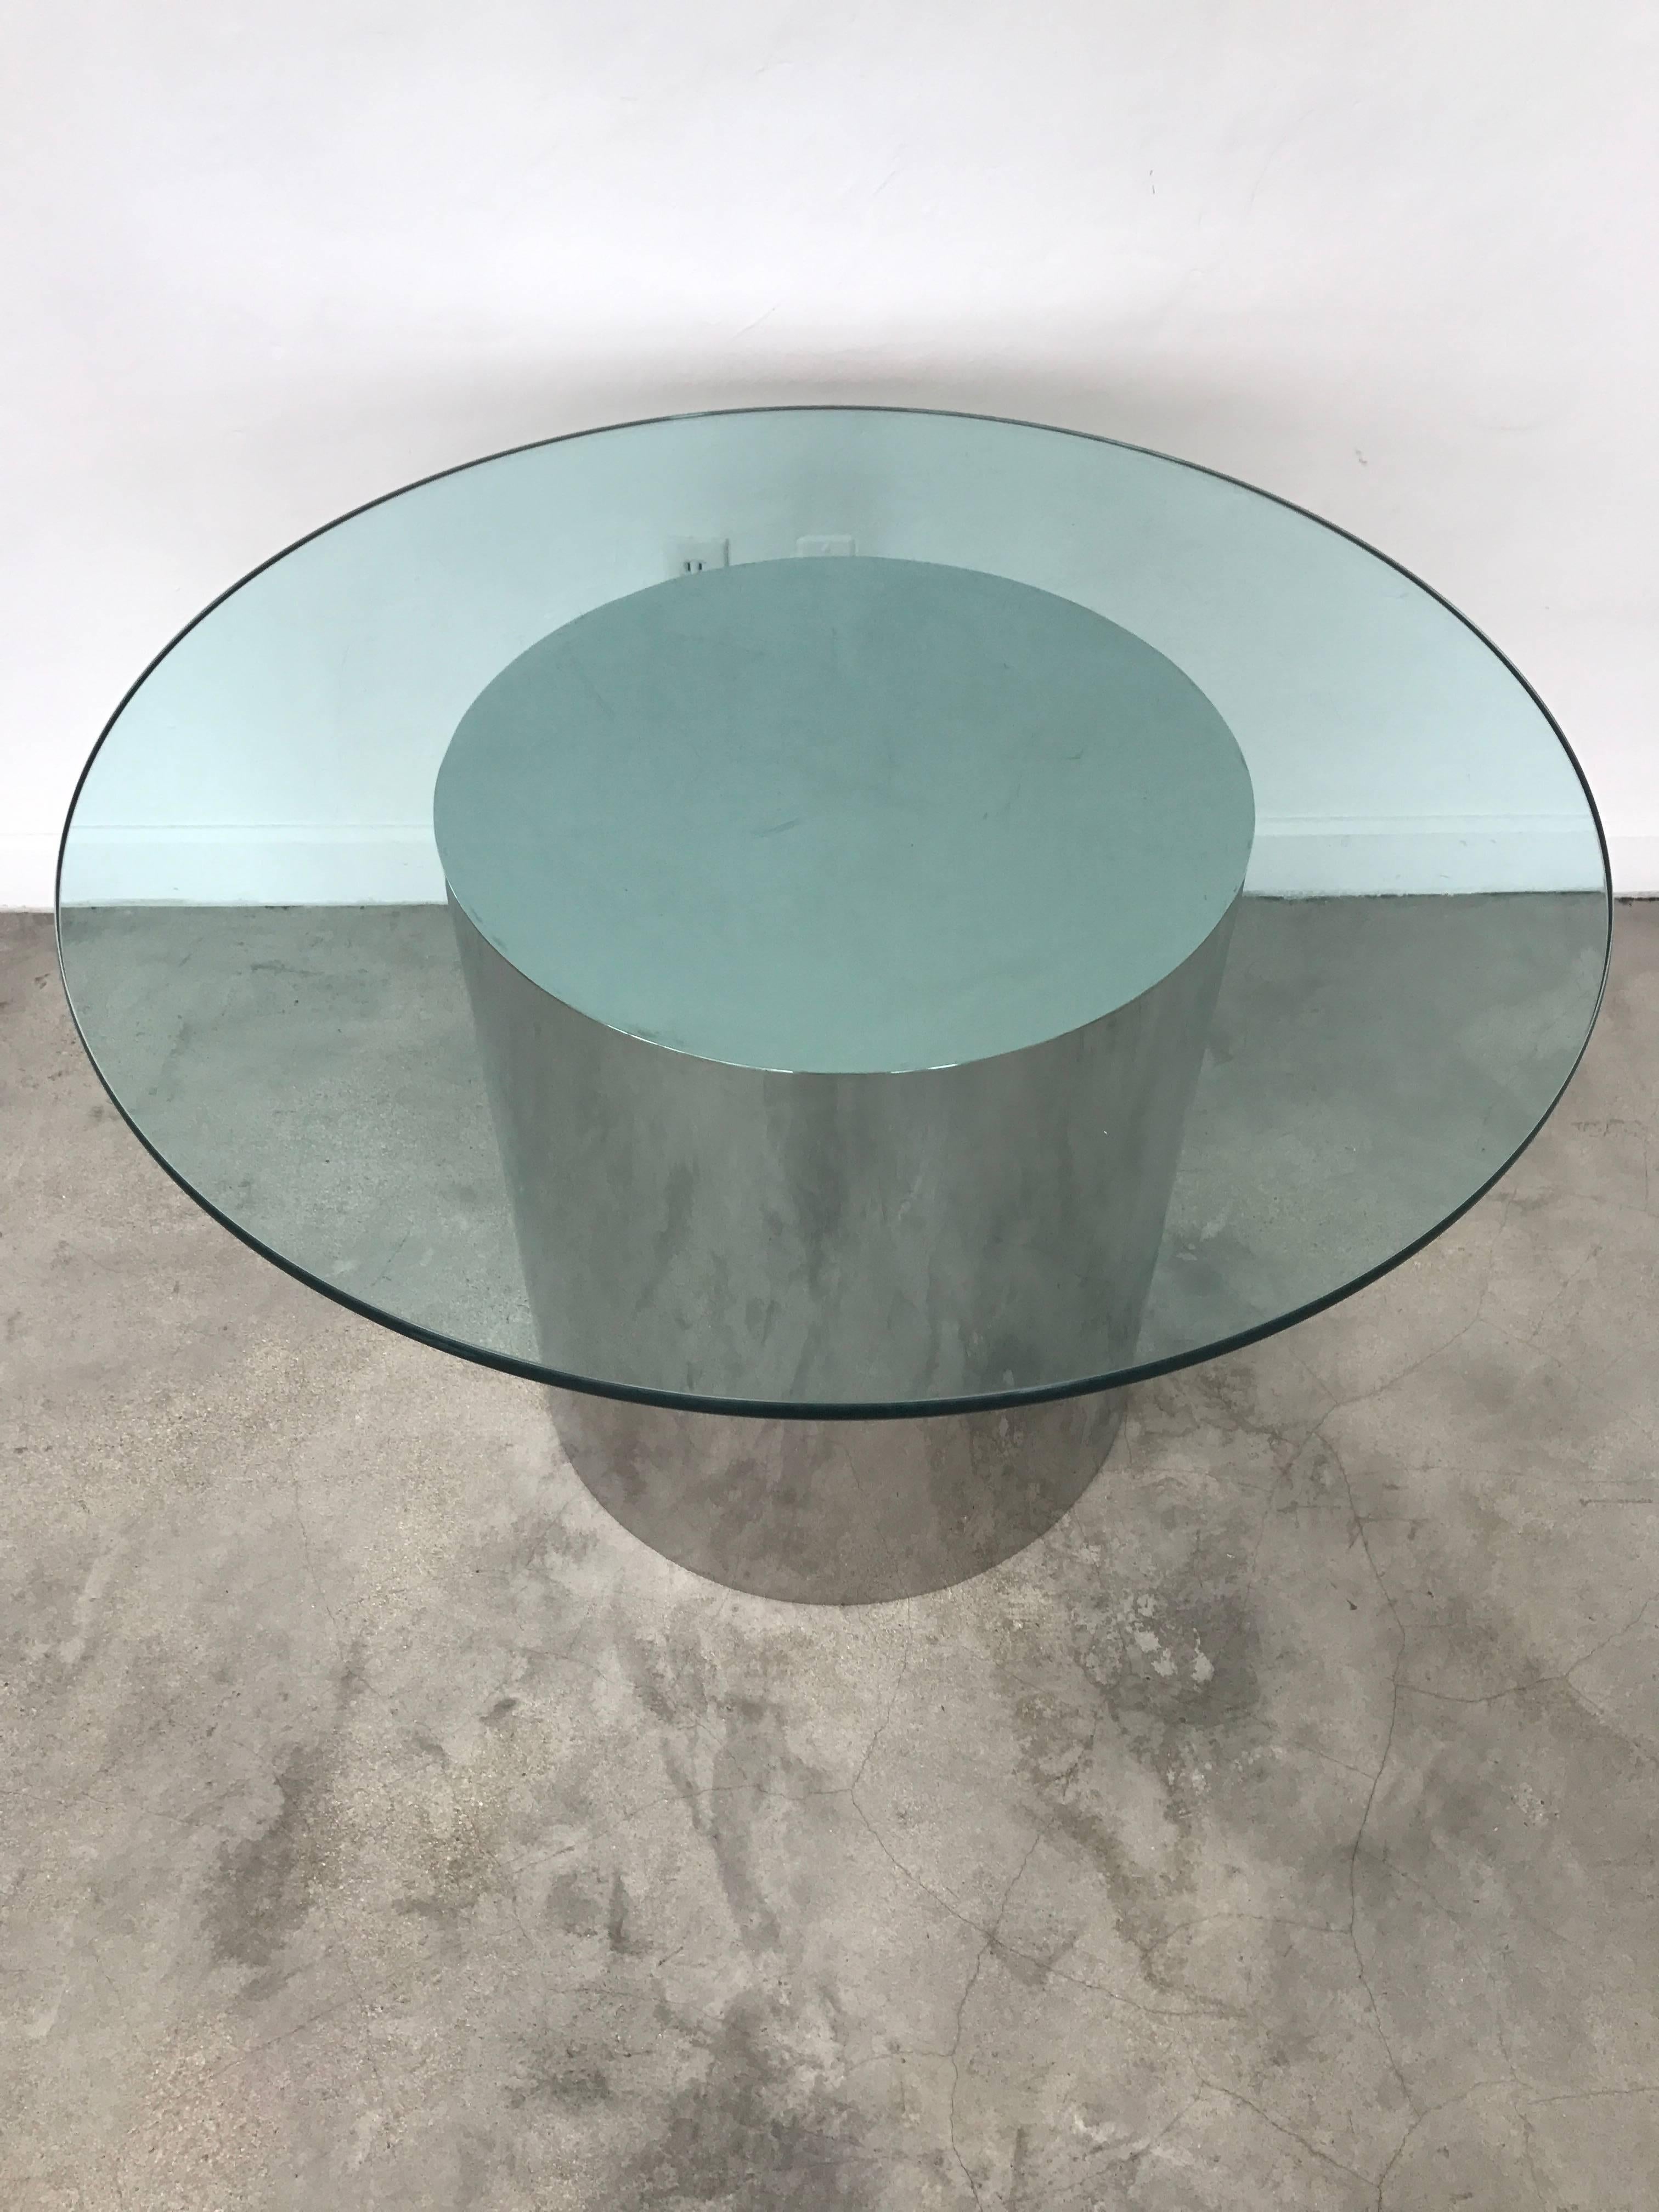 Pace Collection polished steel dining table base. Table does not come with glass, we can assist with custom shape, sizing and ordering.